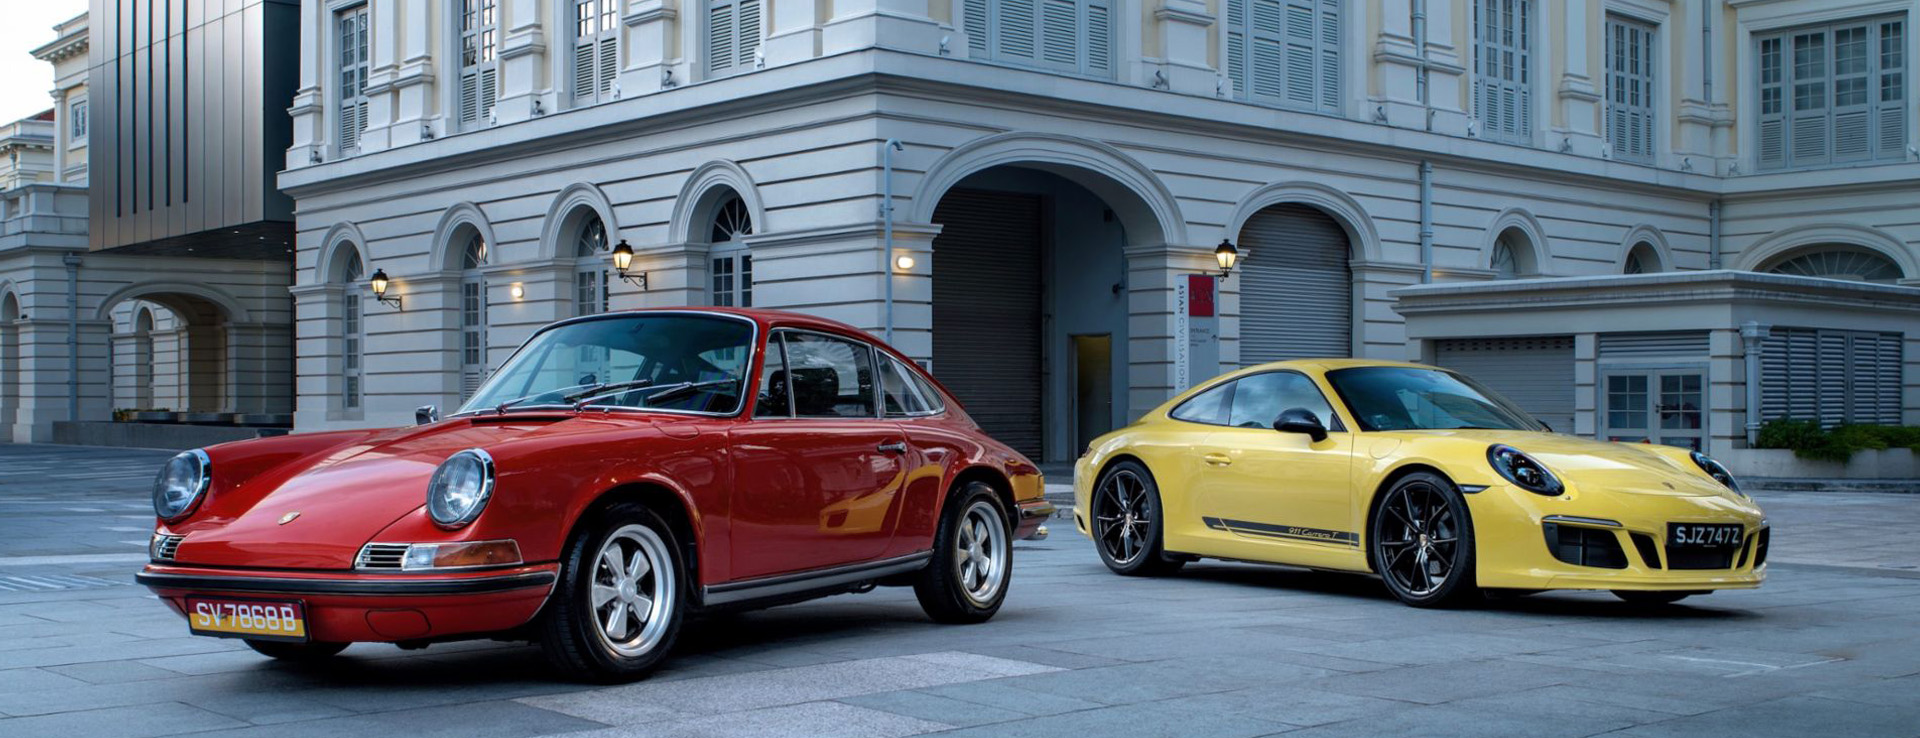 Guards Red and Racing Yellow Porsche cars in front of building